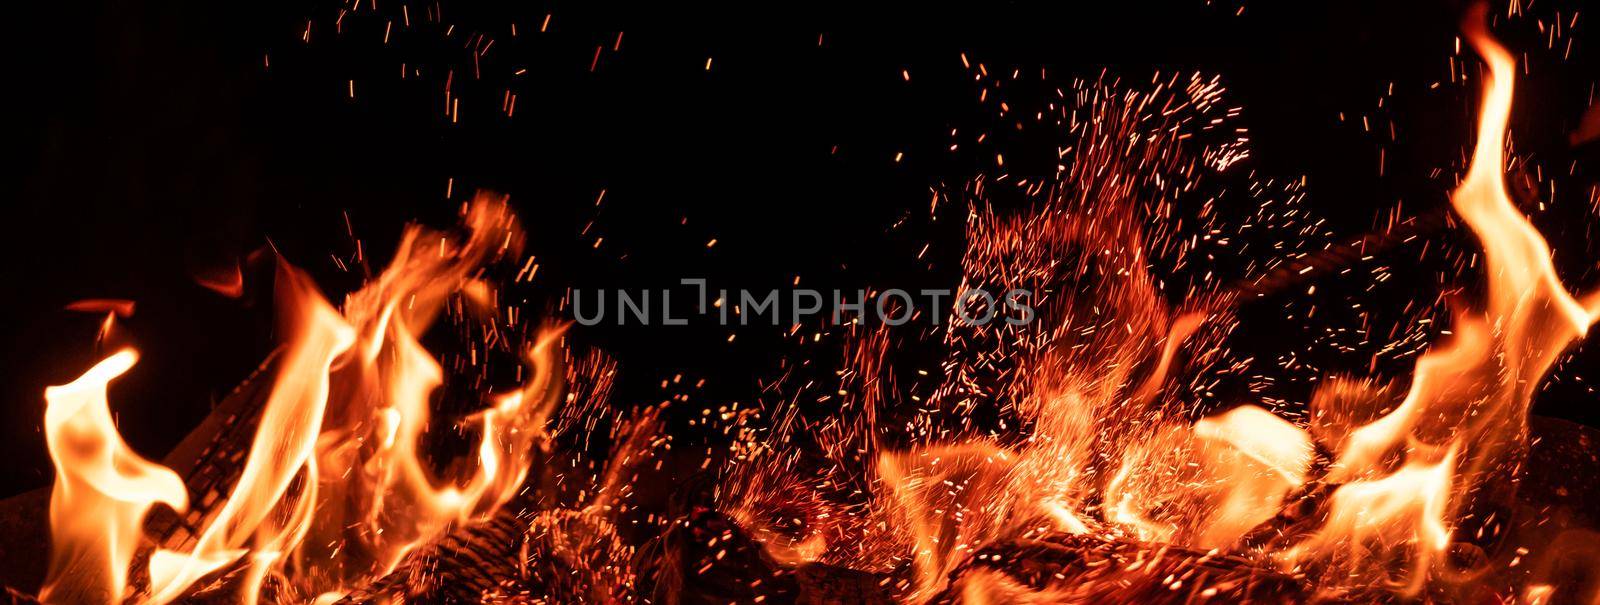 Campfire flame isolated on black background by GekaSkr